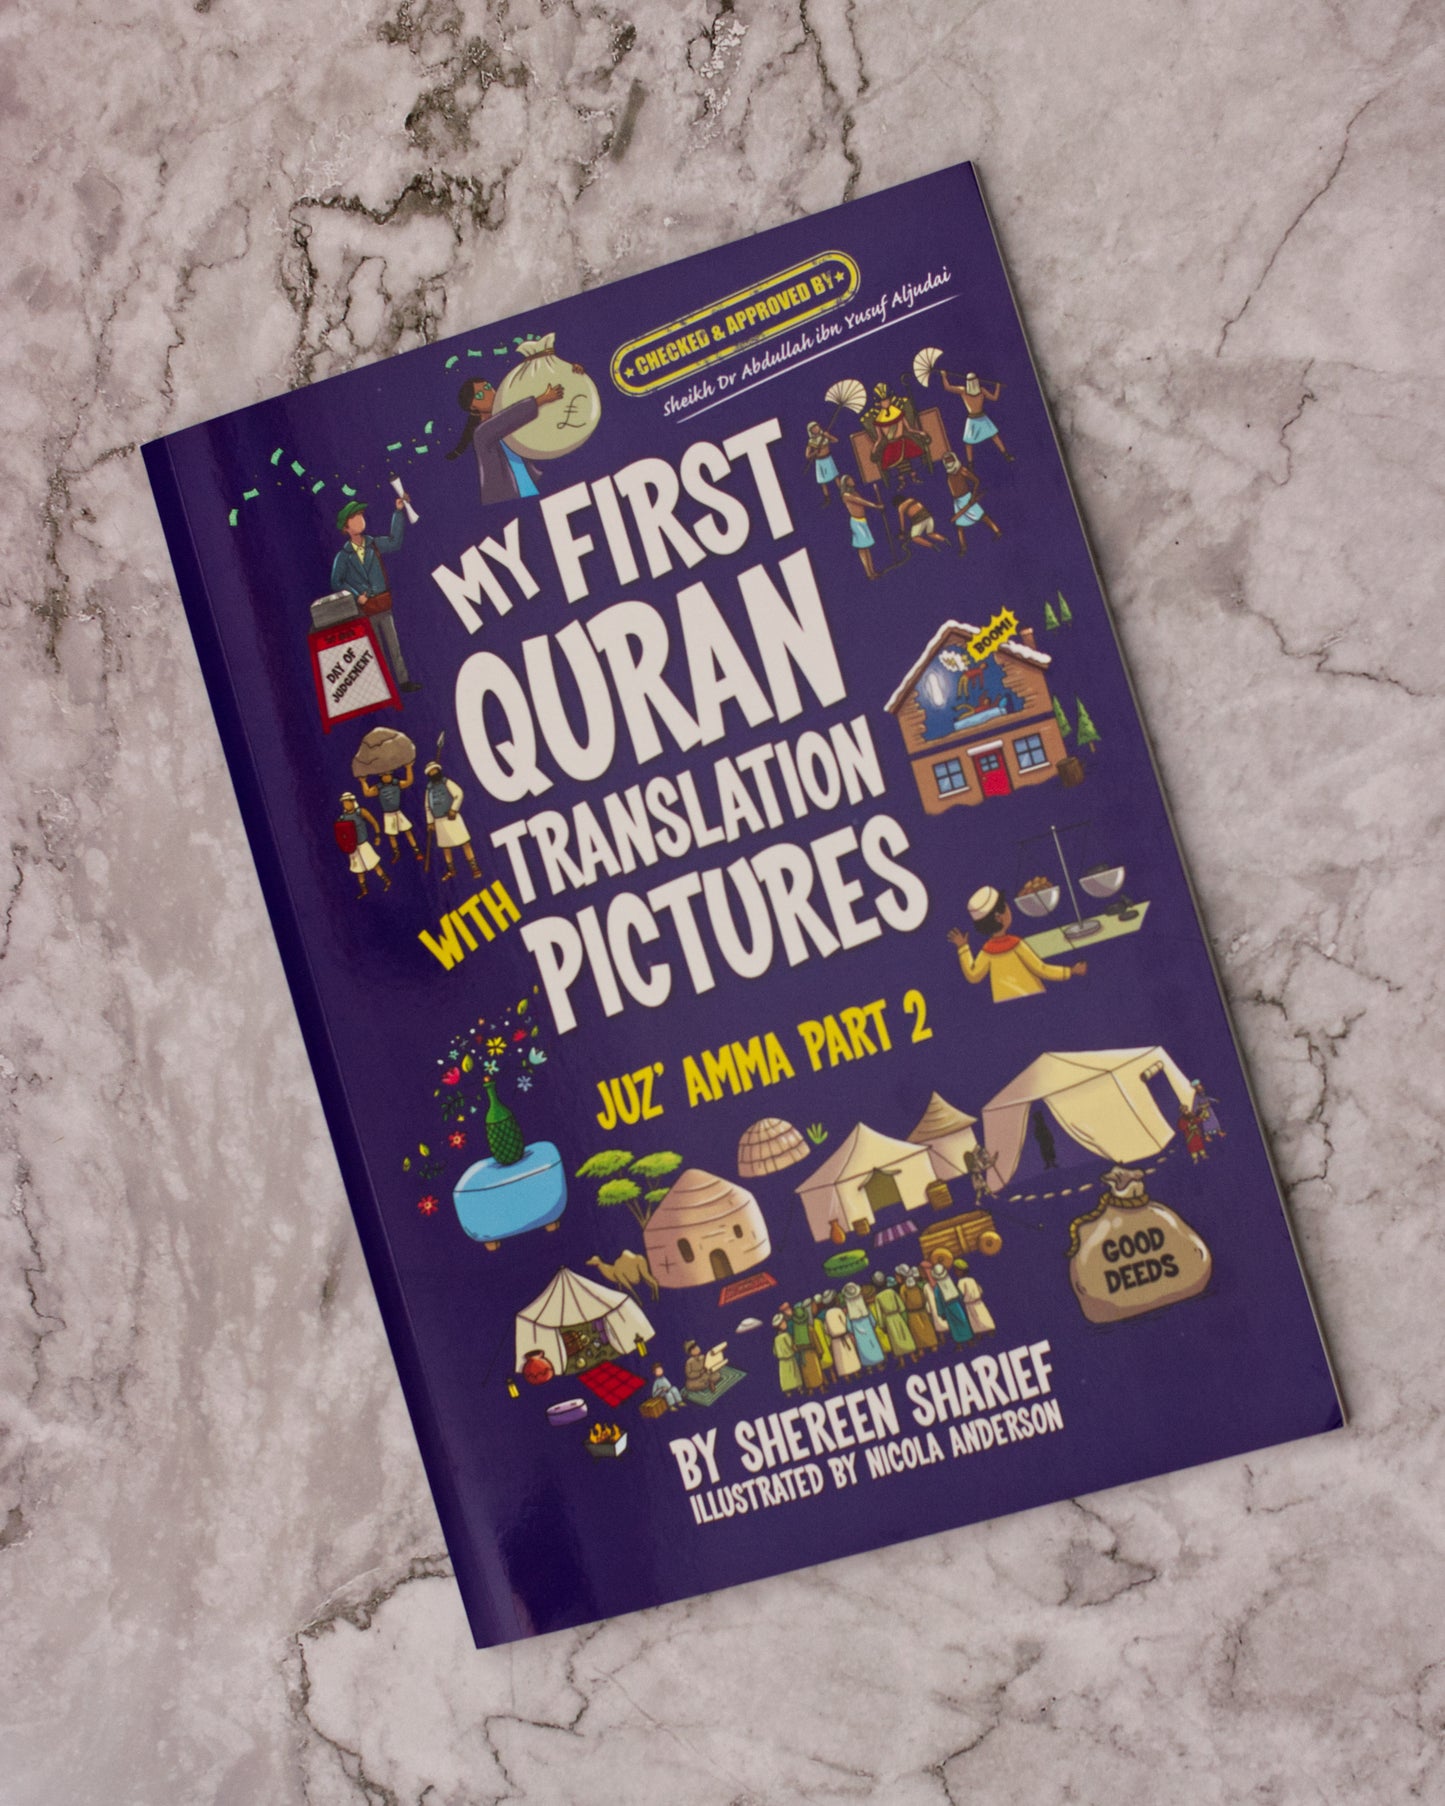 My First Quran with Pictures - Juz Amma Part 2